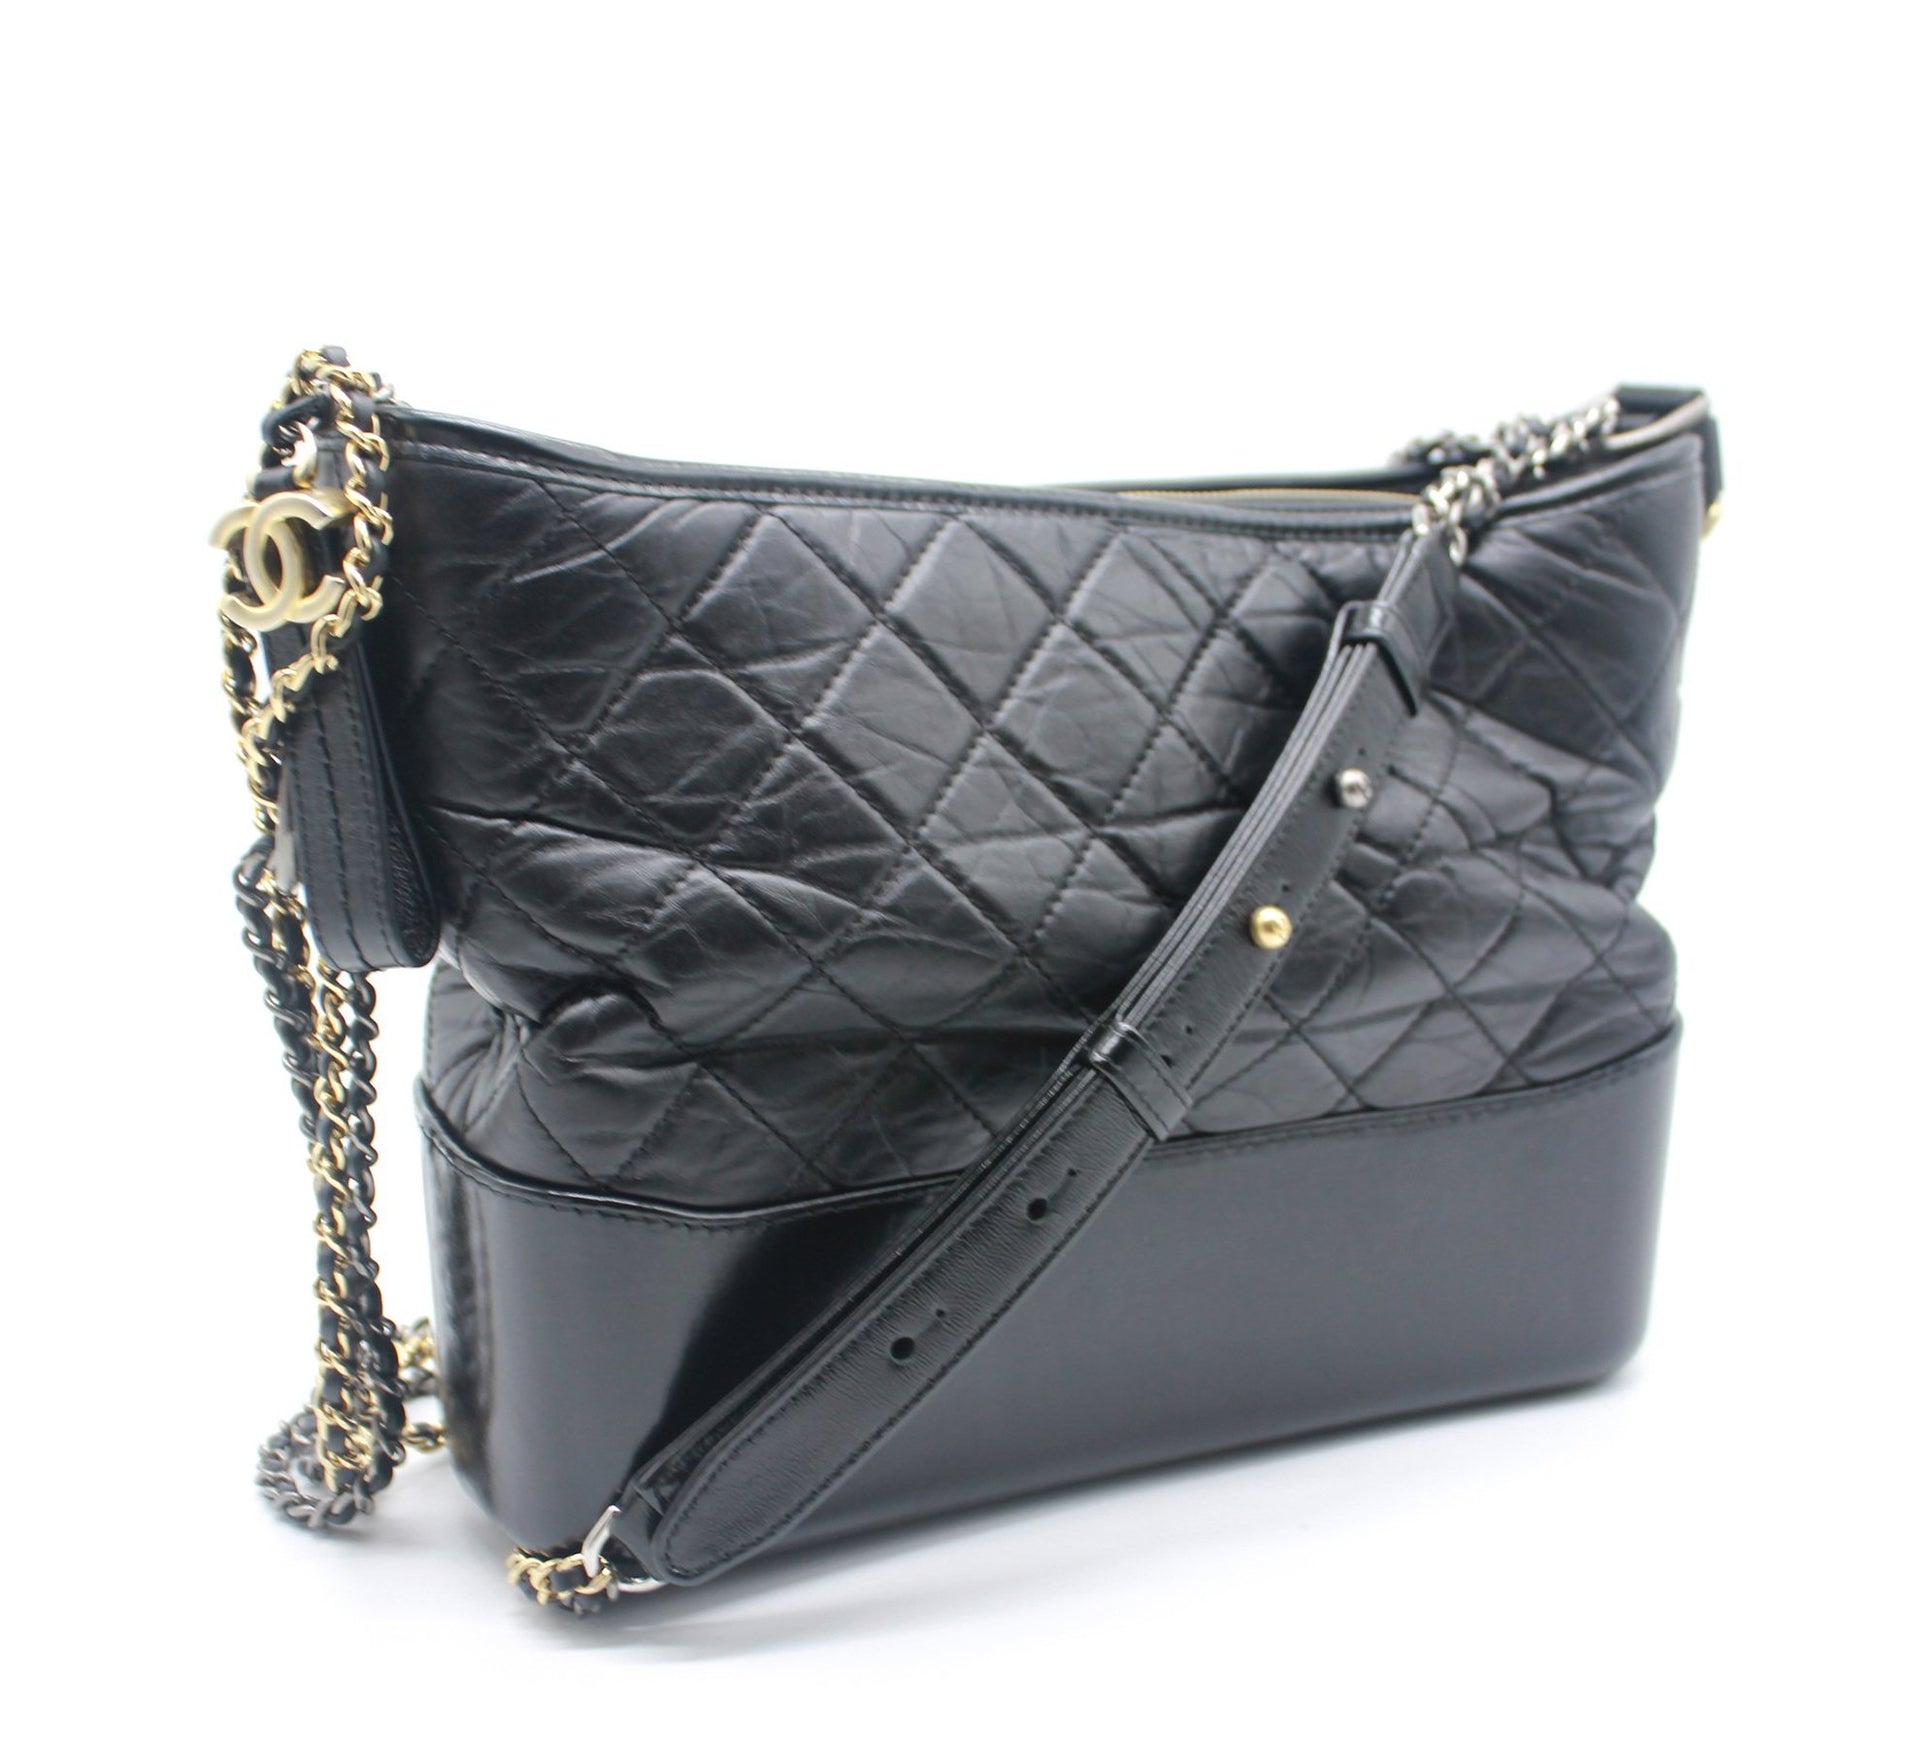 CHANEL bag 'Gabrielle Hobo' in aged black quilted leather - VALOIS